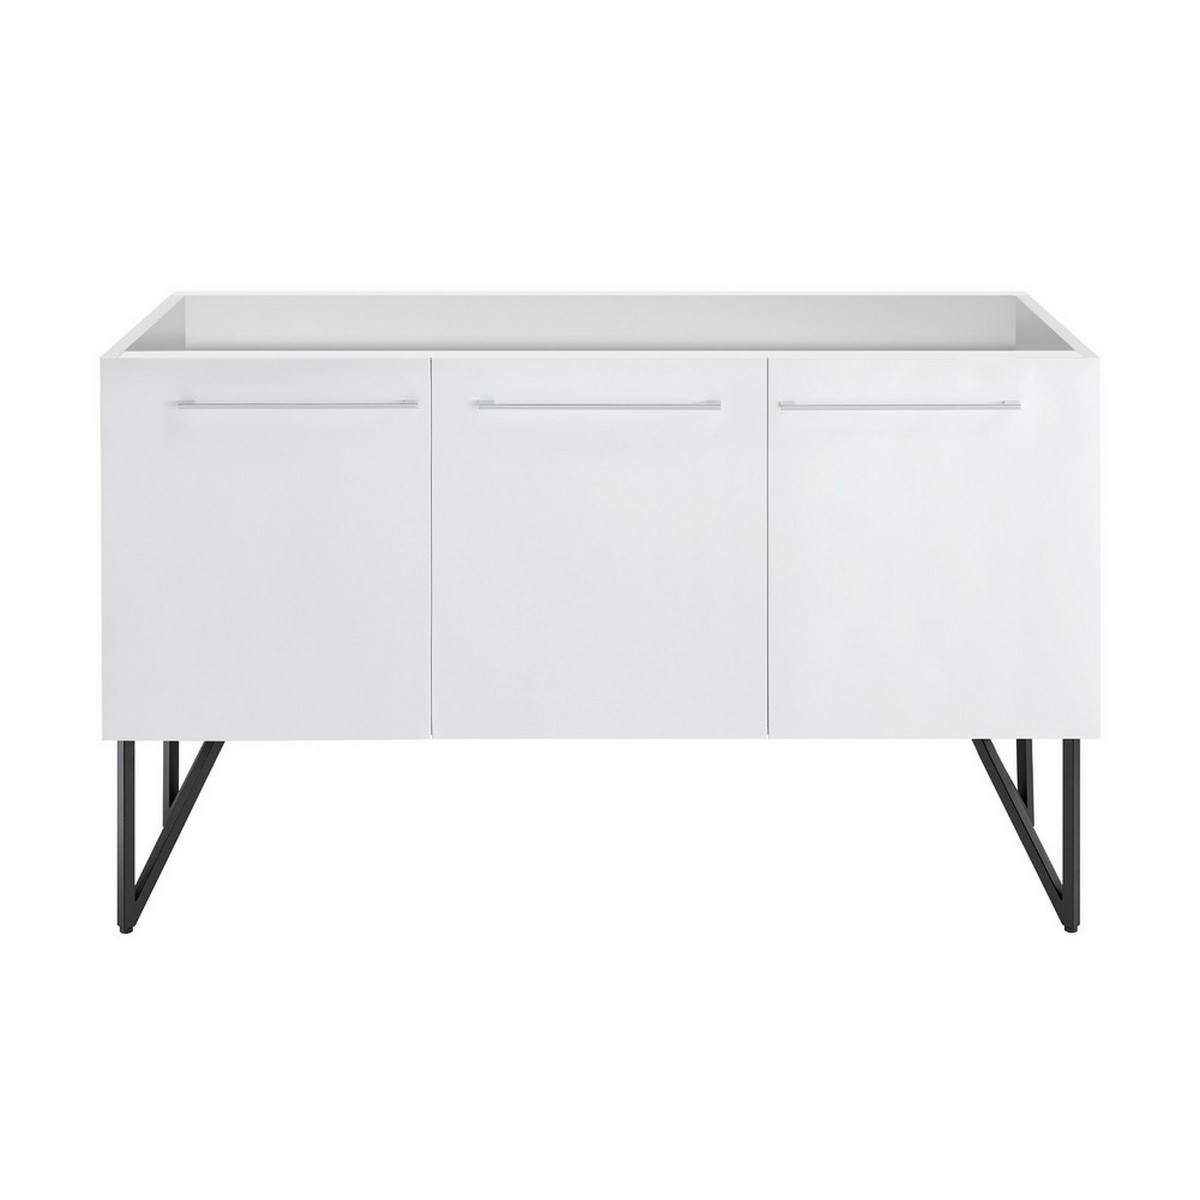 SWISS MADISON SM-BV26-C ANNECY 59 1/8 INCH FREESTANDING DOUBLE SINK BATHROOM VANITY CABINET ONLY